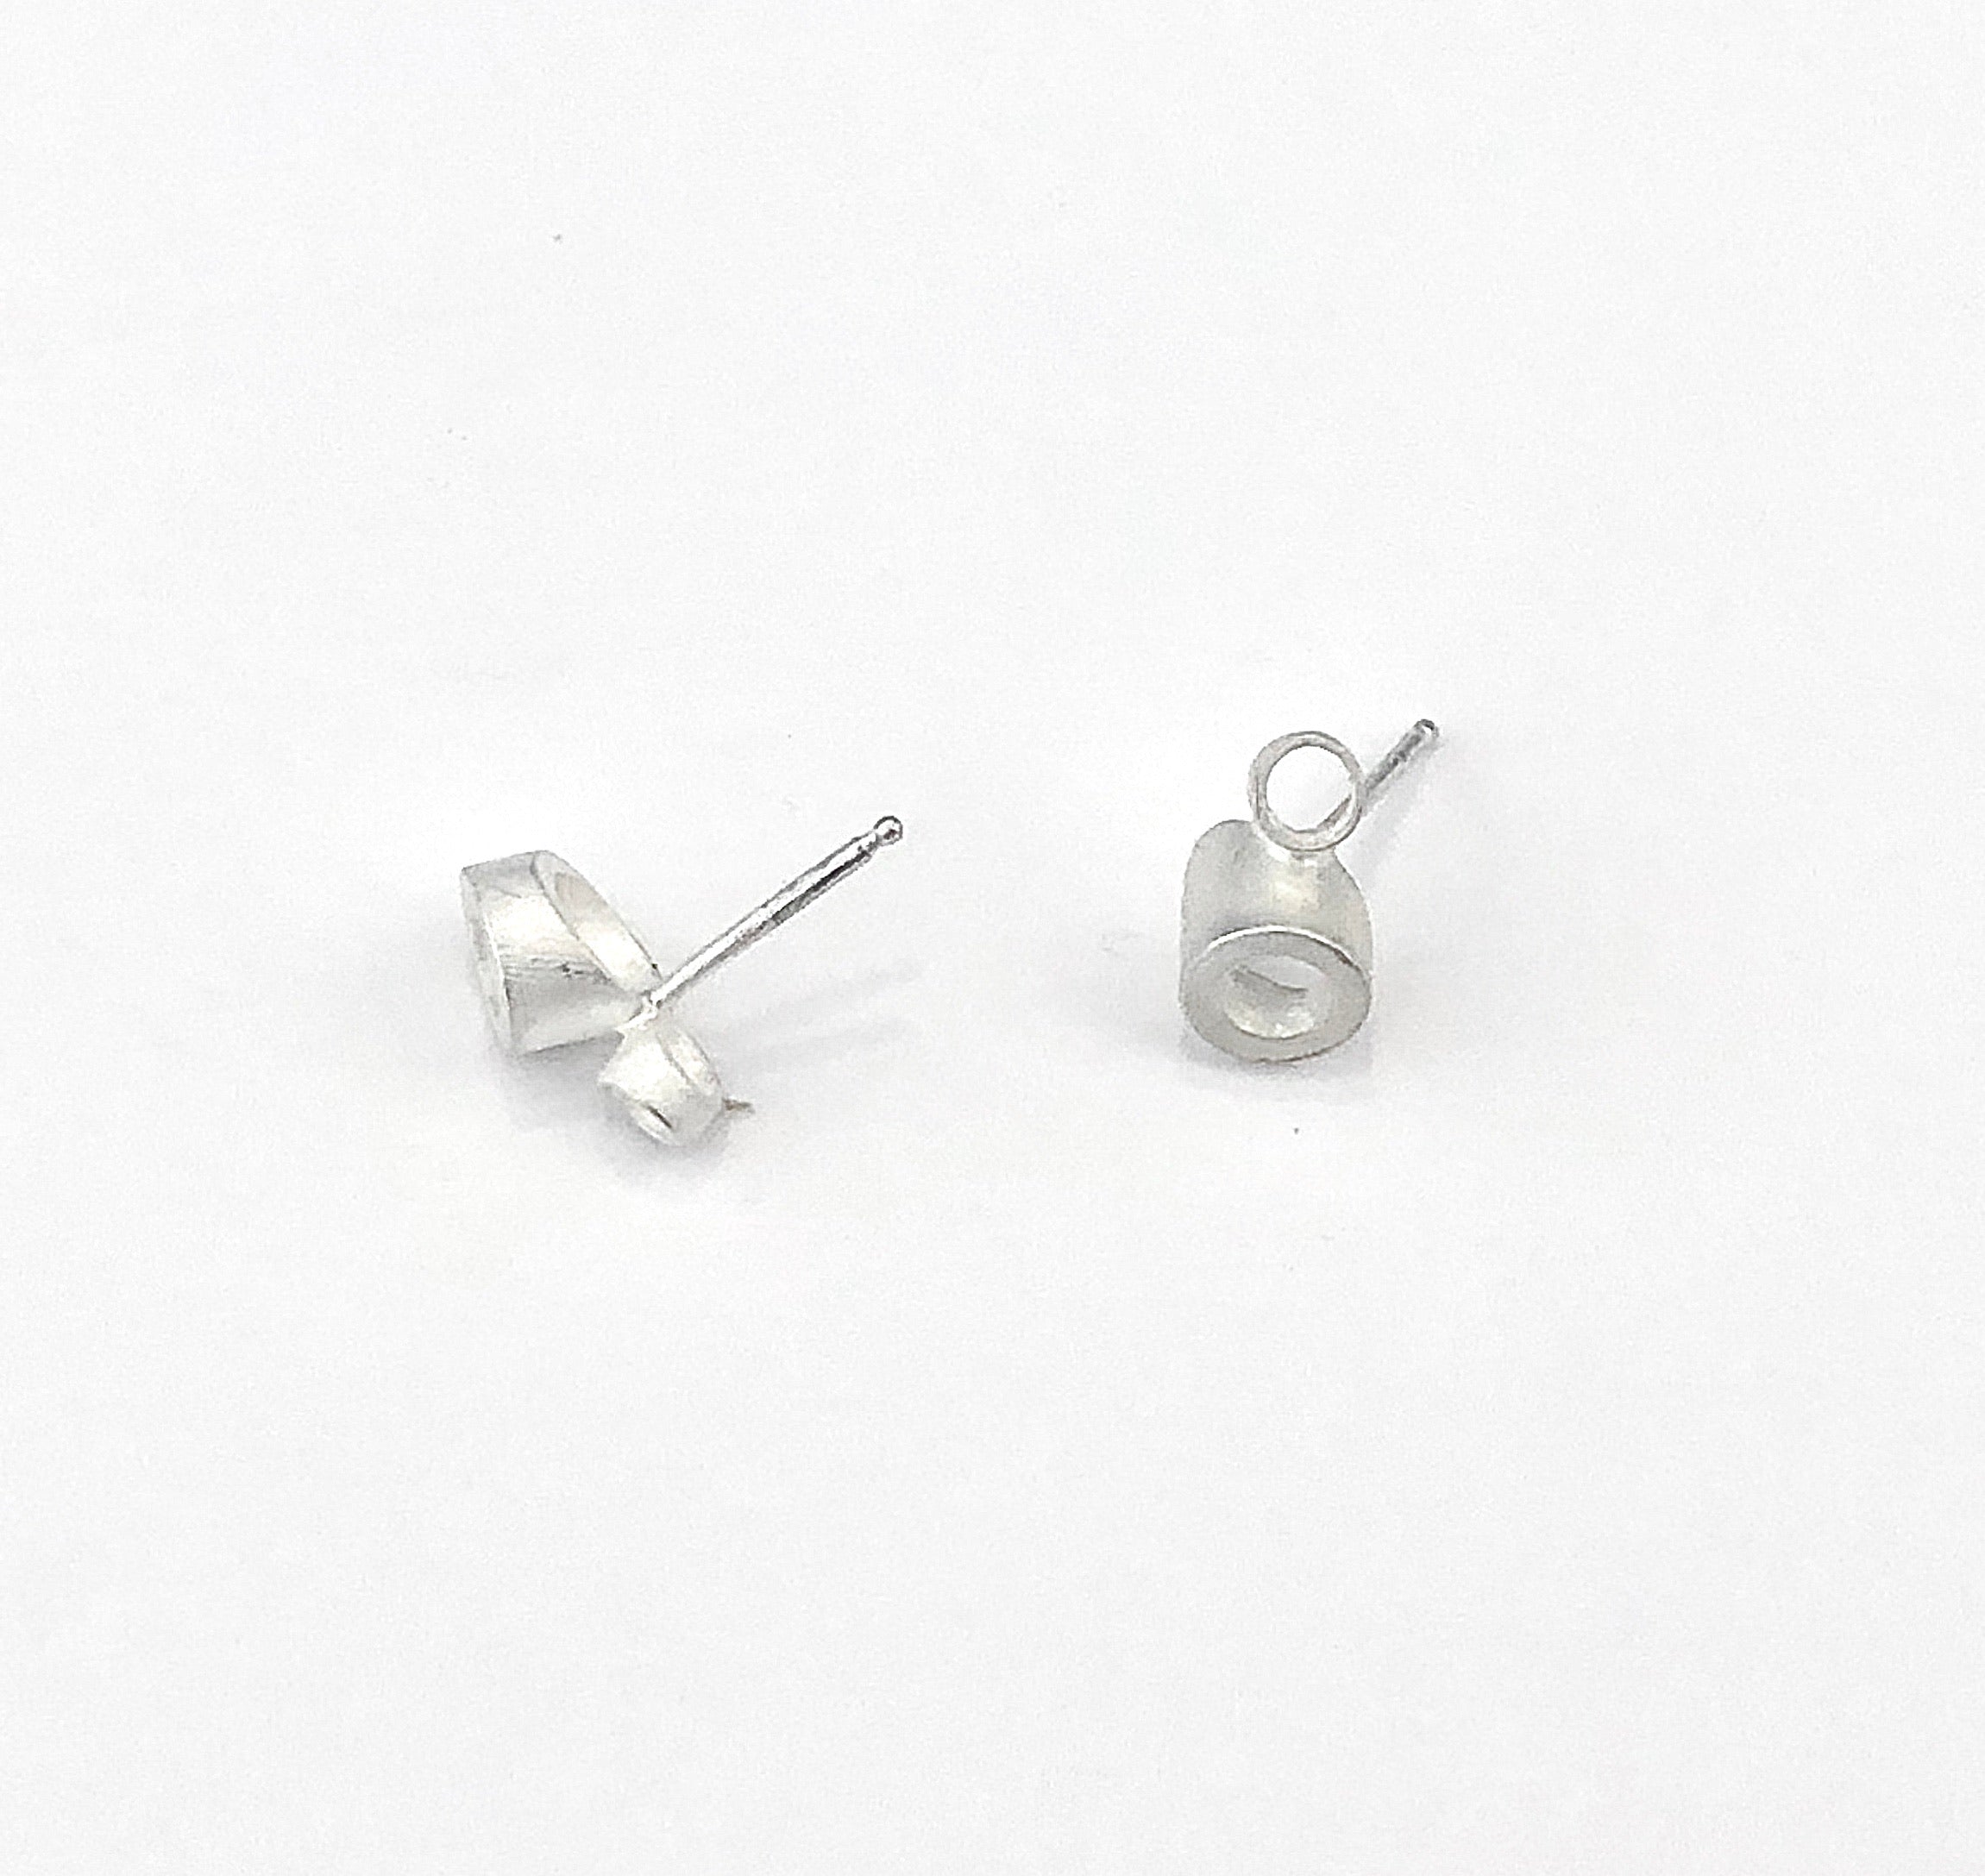 Double Angled Tube Post Earrings in oxidized silver